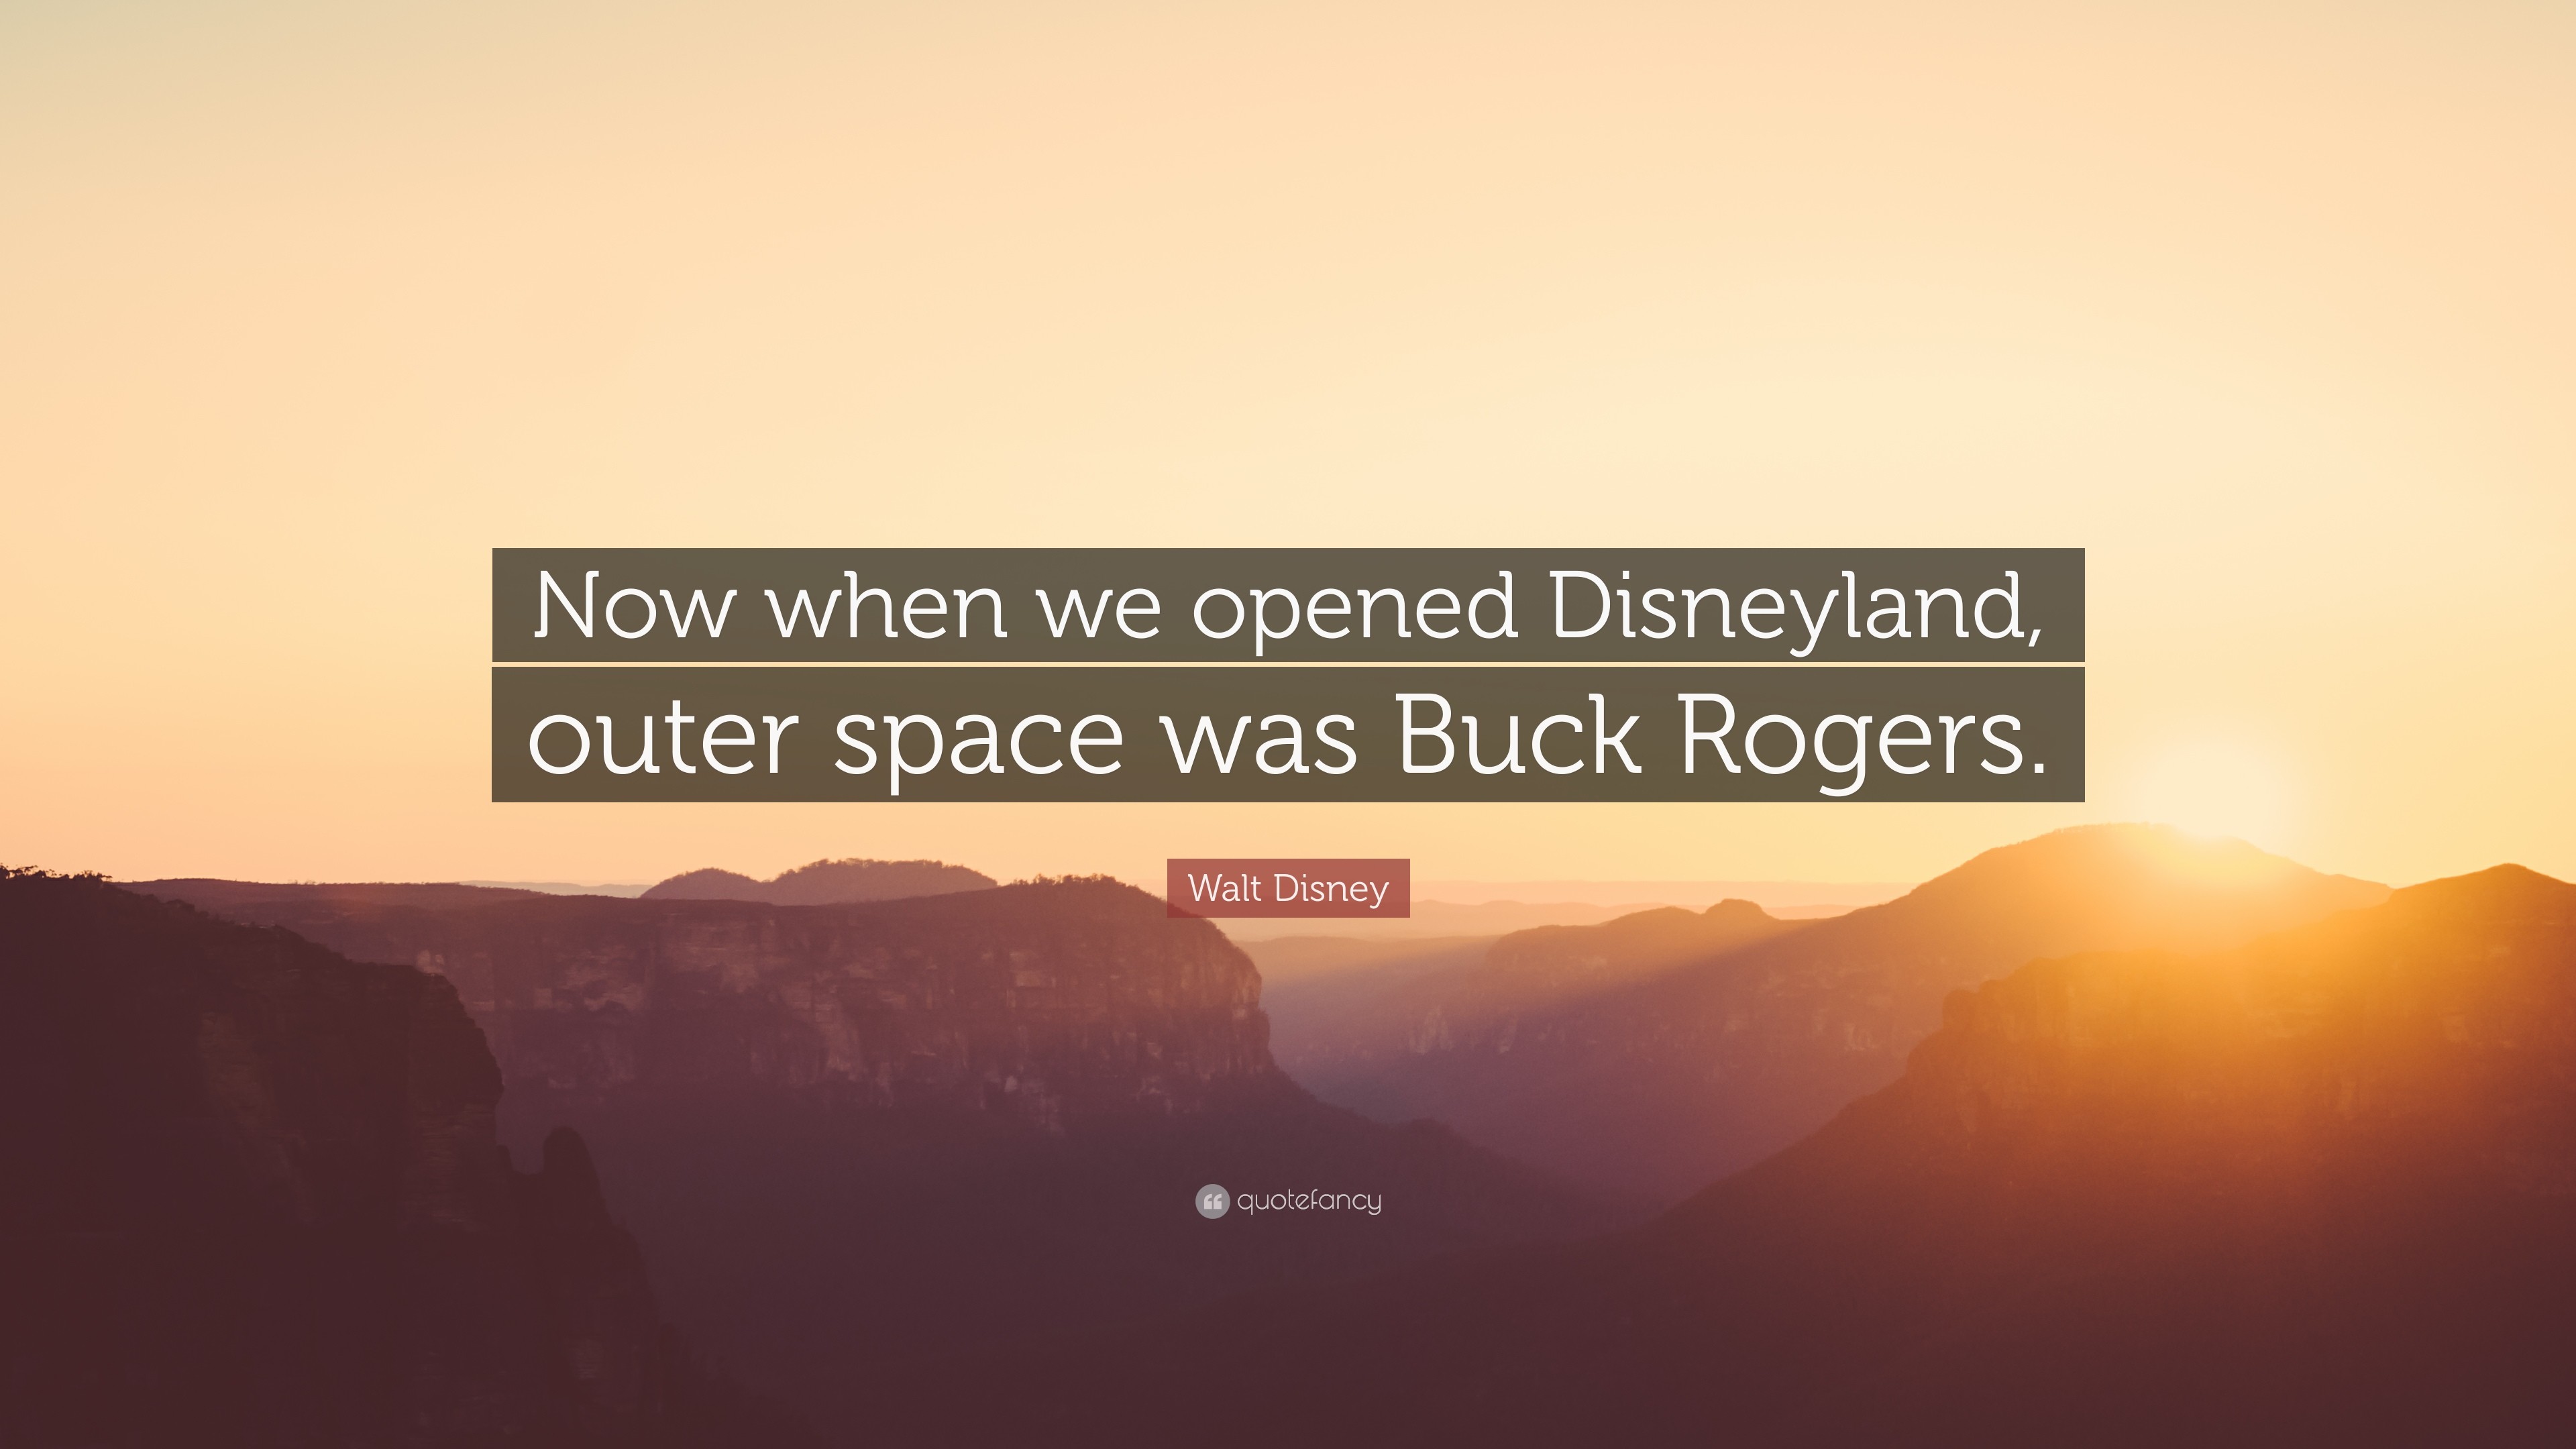 3840x2160 Walt Disney Quote: “Now when we opened Disneyland, outer space was Buck  Rogers